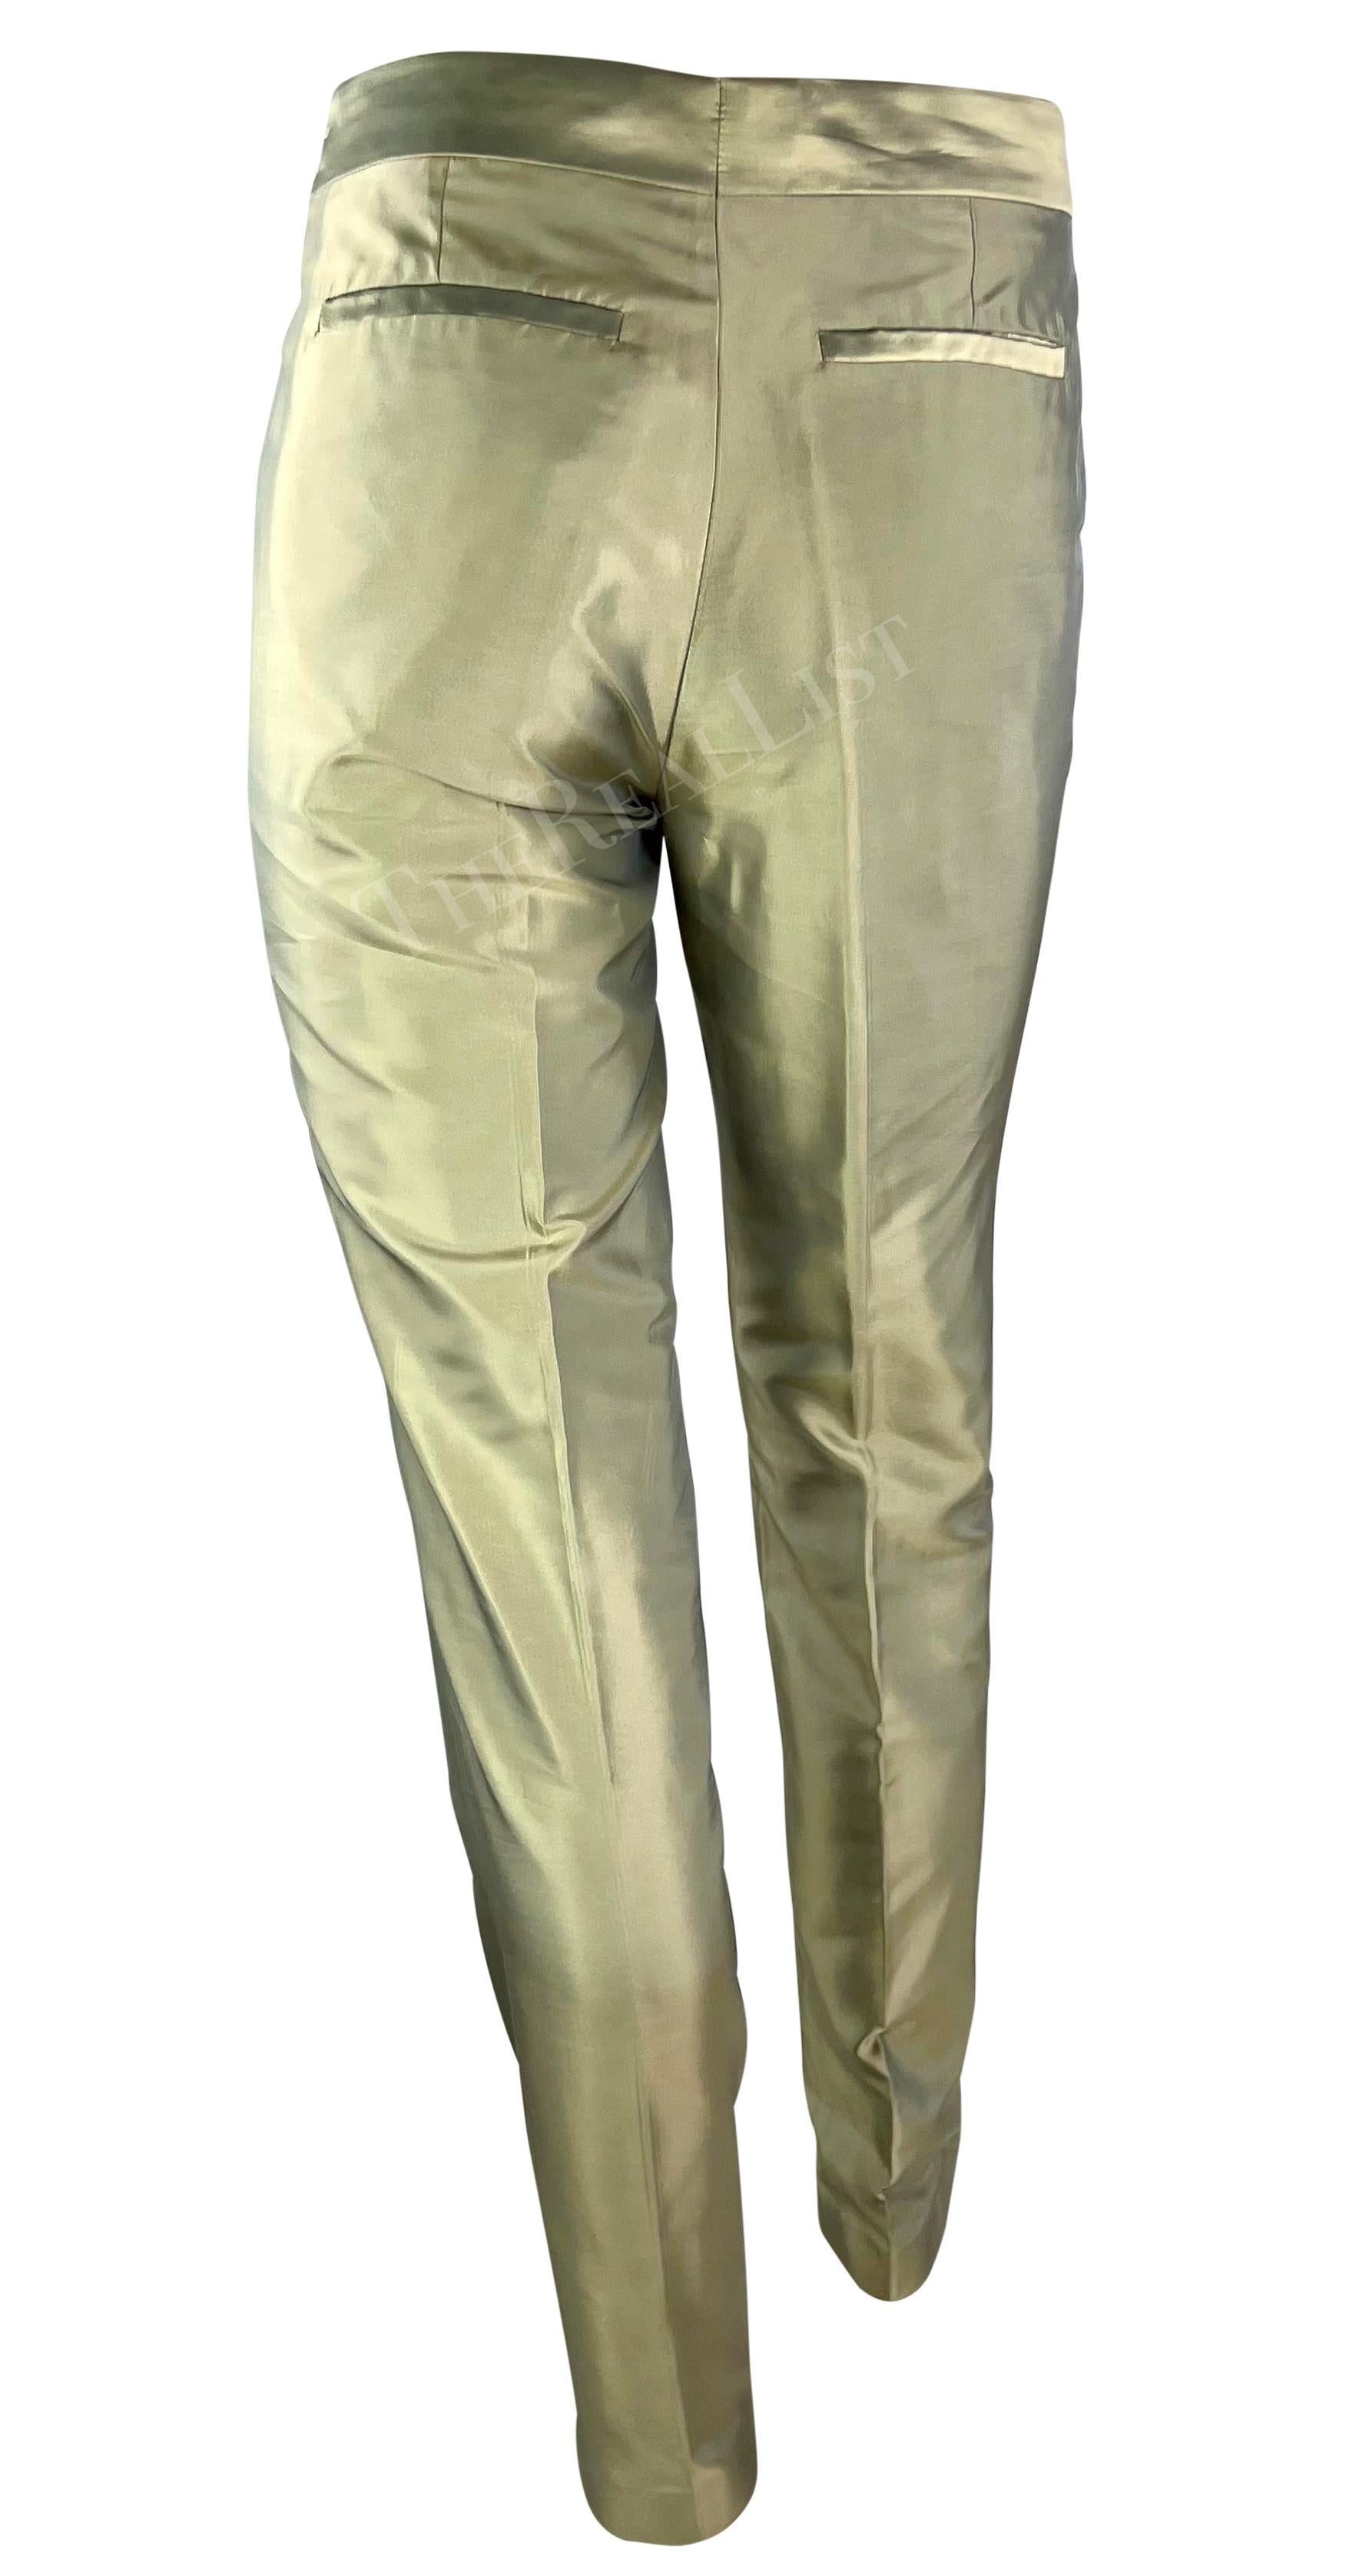 Women's S/S 2000 Gucci by Tom Ford Light Green Iridescent Silk Straight Leg Pants For Sale